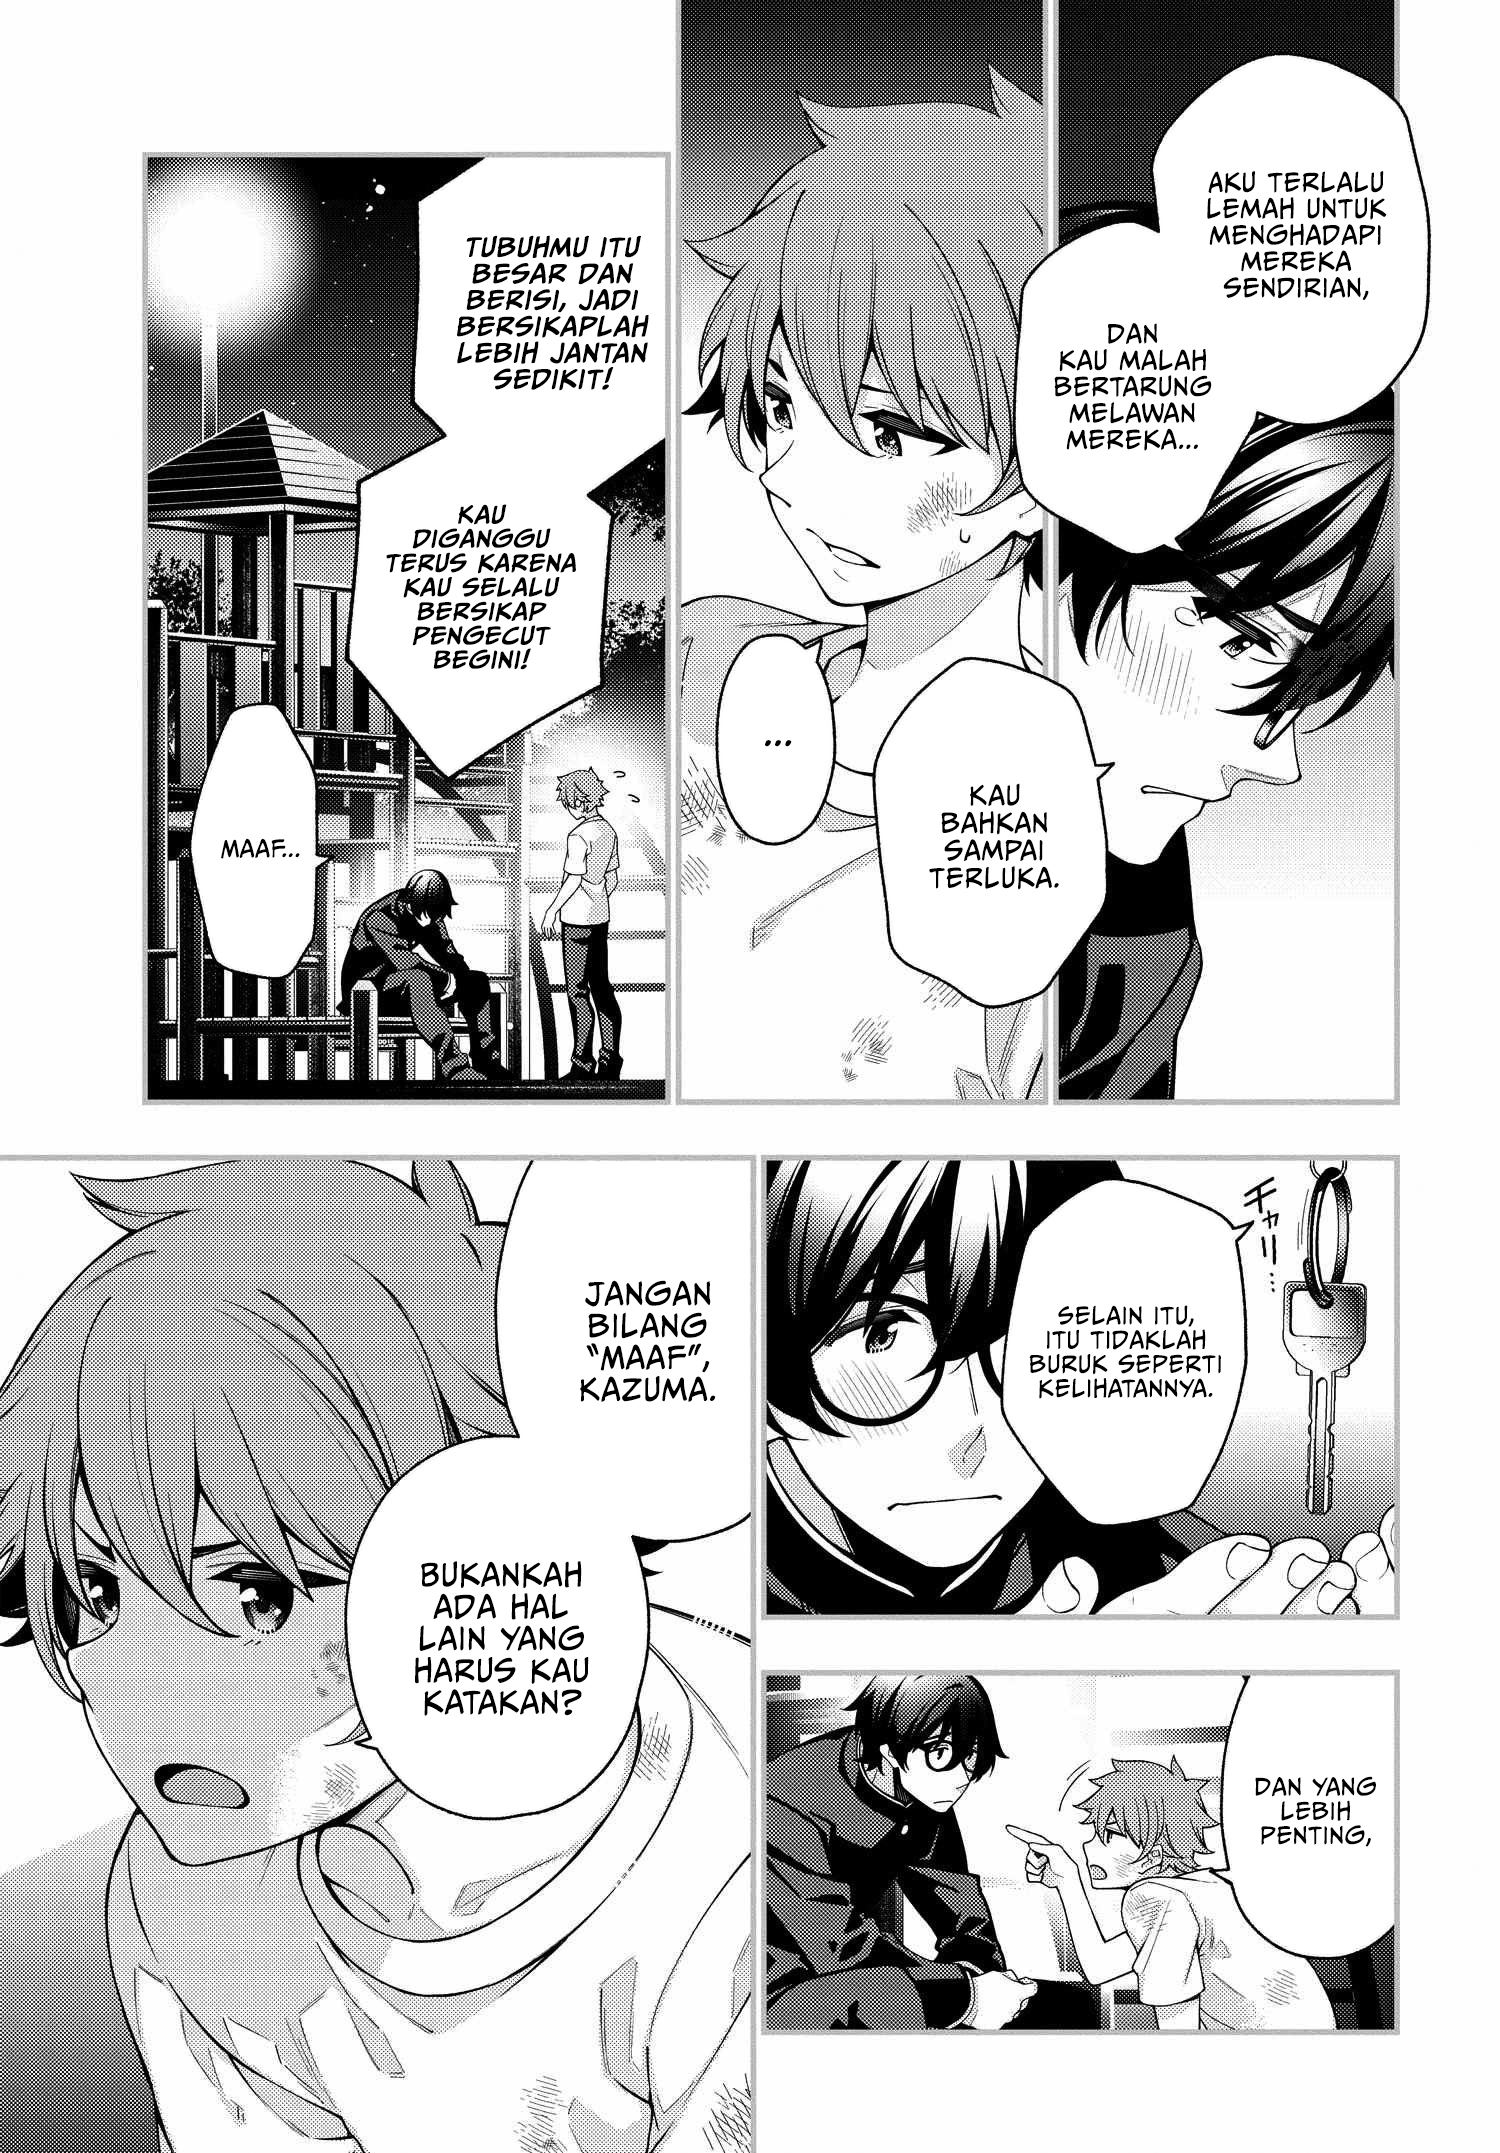 A Choice of Boyfriend and Girlfriend Chapter 01 10